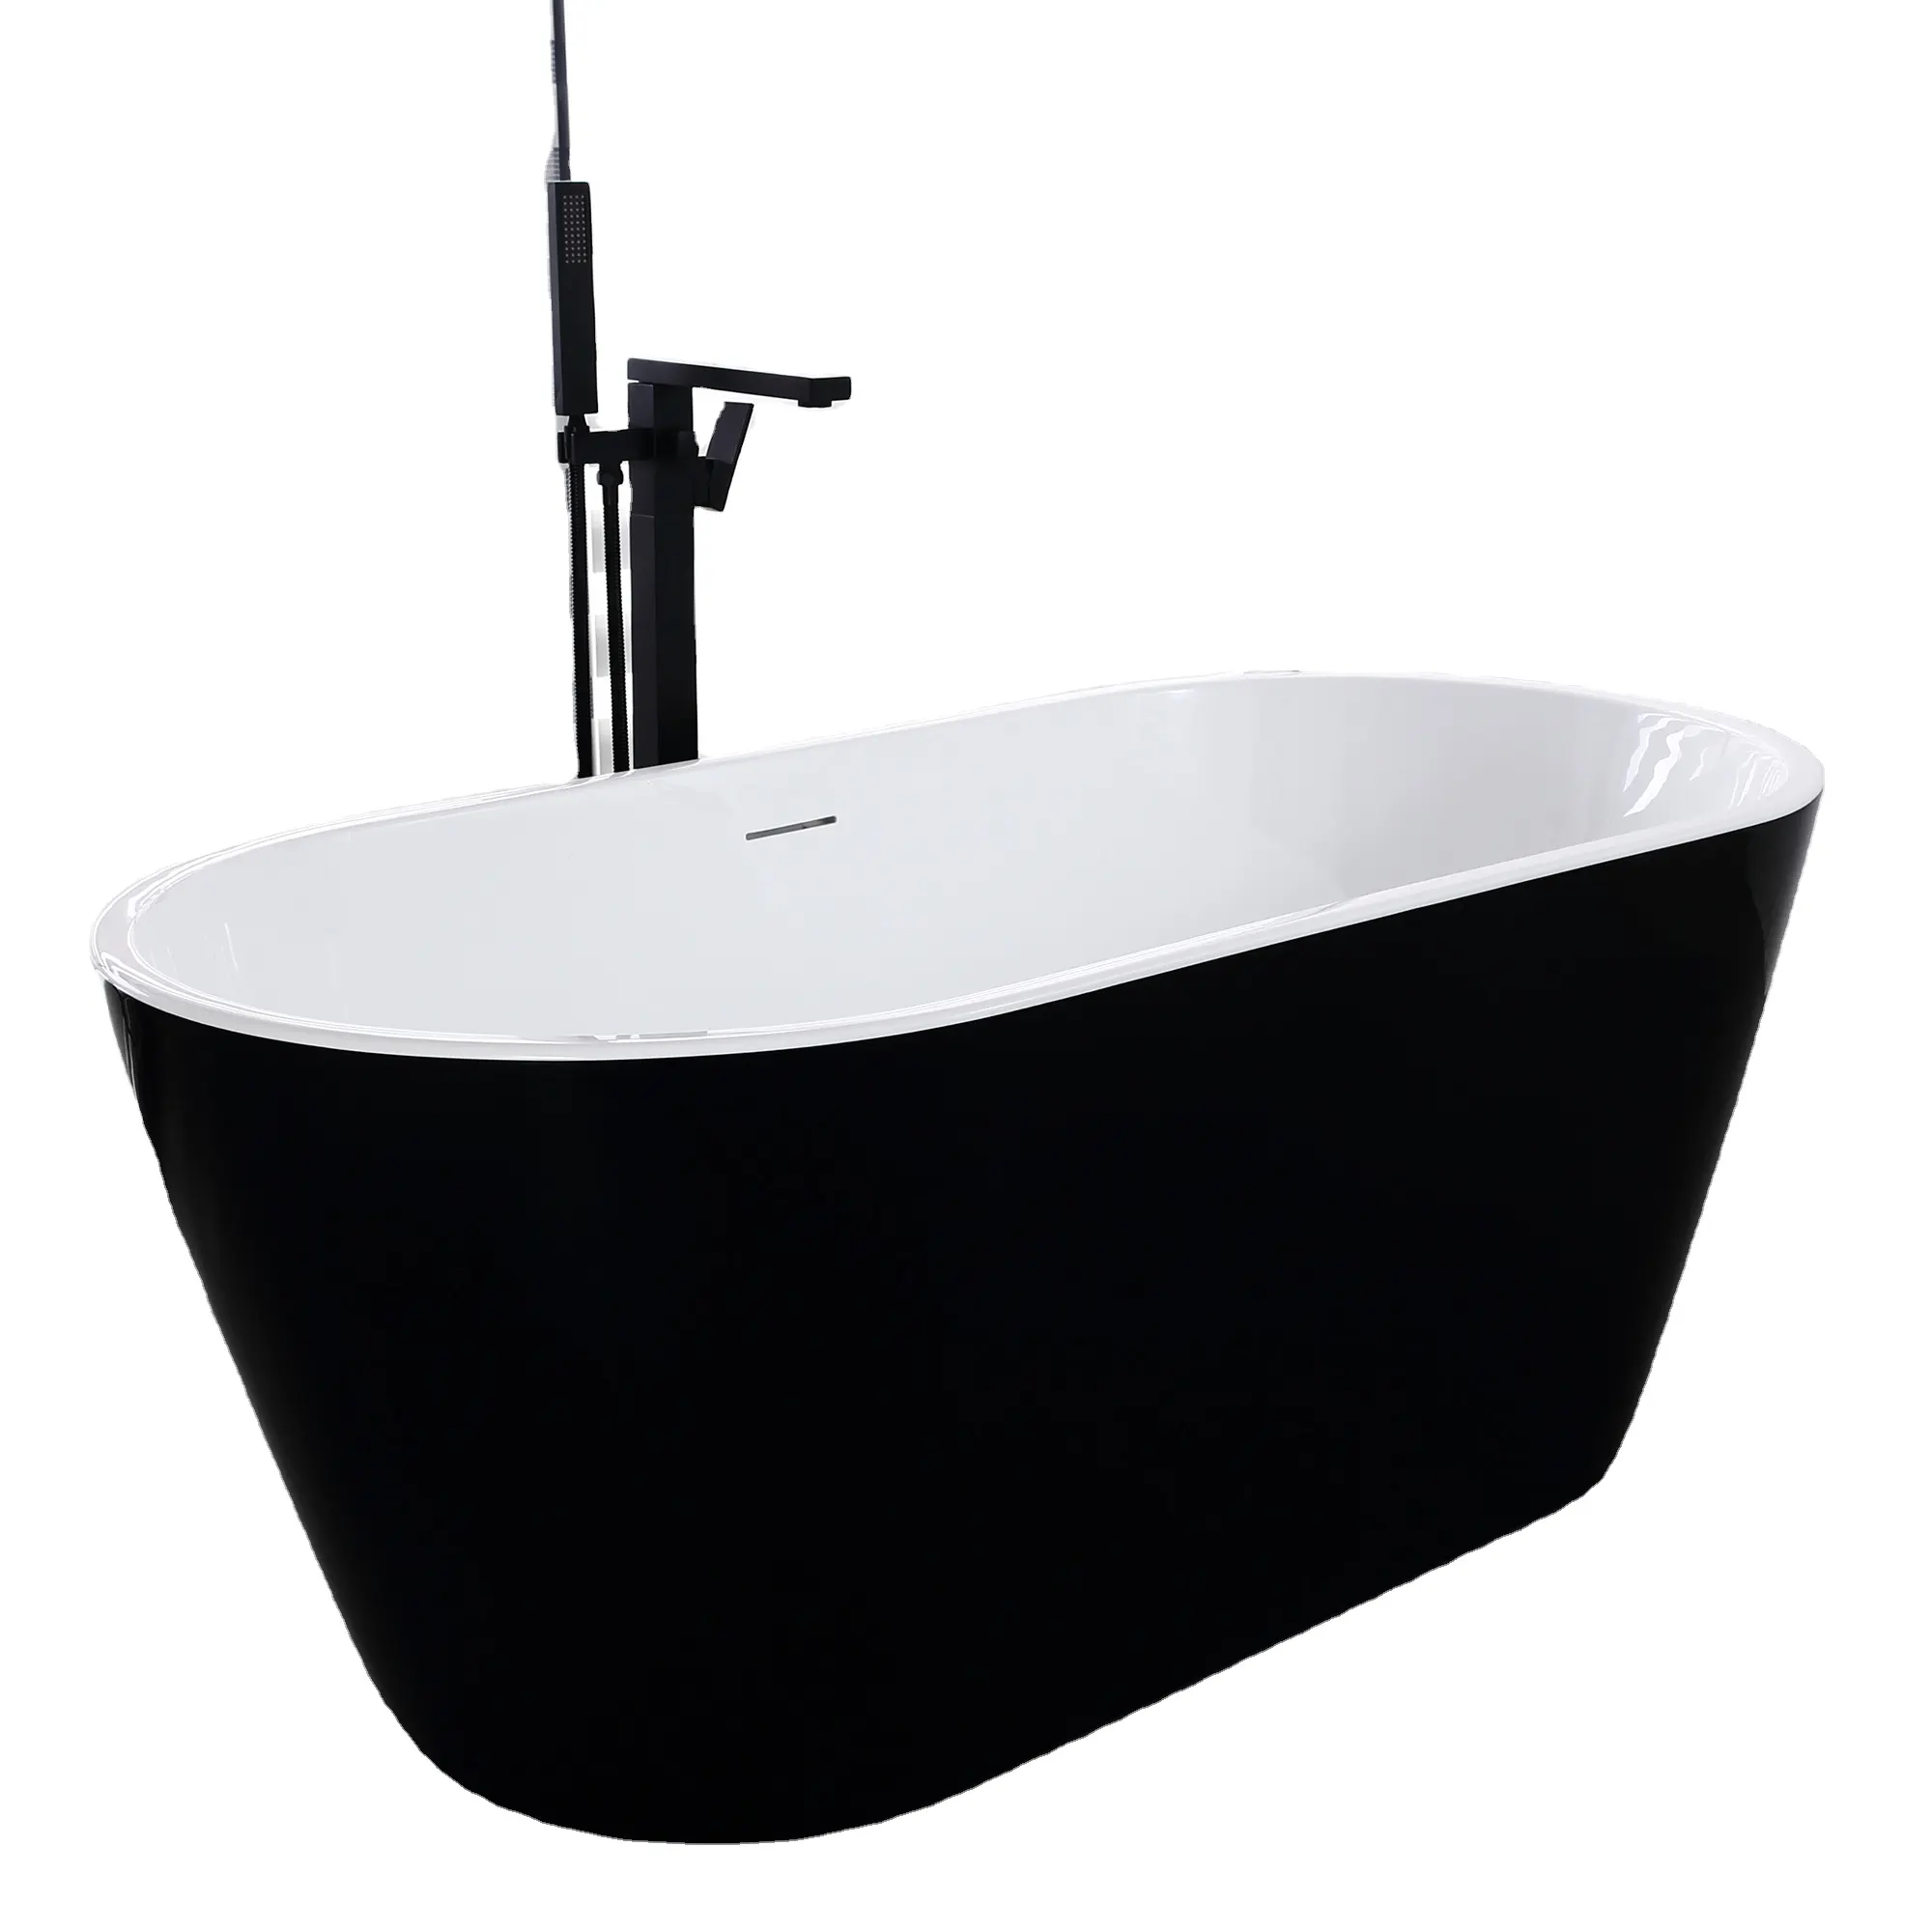 cUPC Factory the best price / Quality Black and white stacked acrylic oval shapes free standing bathtub 58.85"x29.33"x23.62"